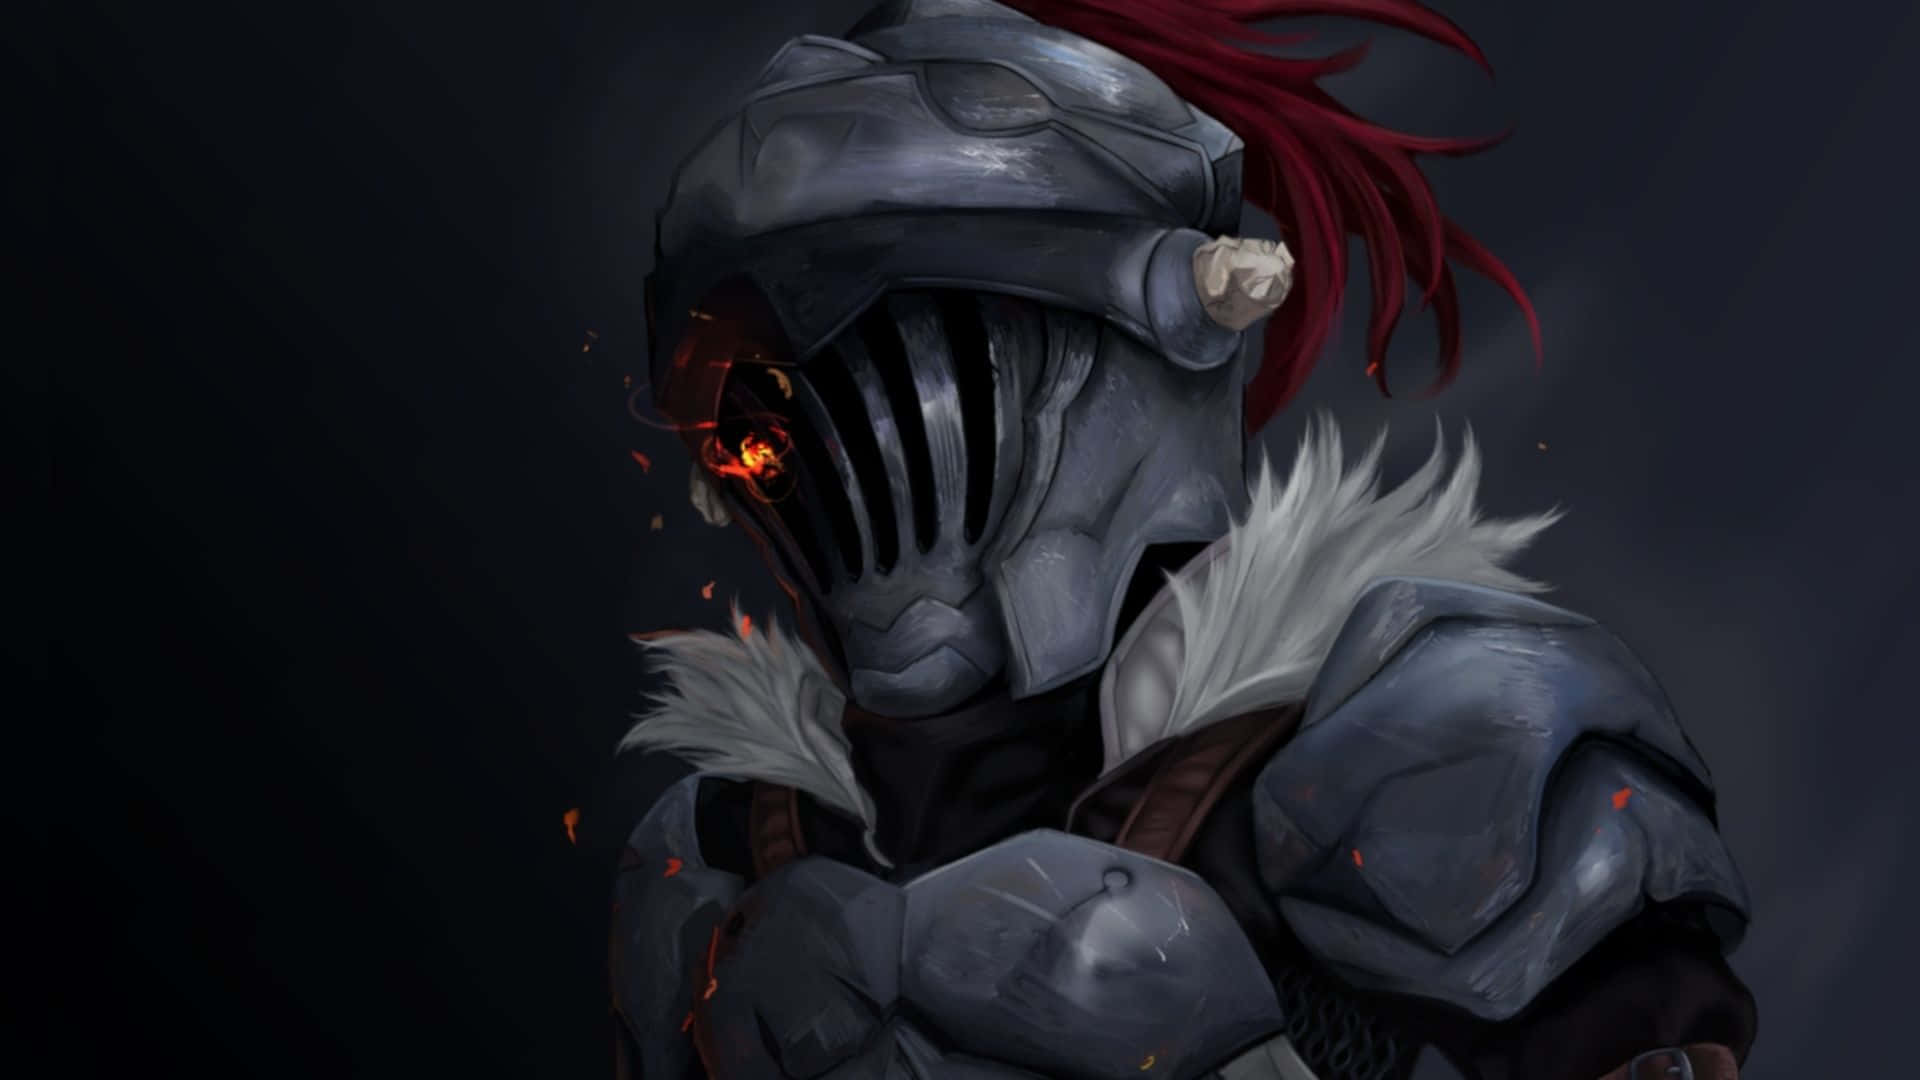 Goblin Slayer - The Fearless Hero in Action